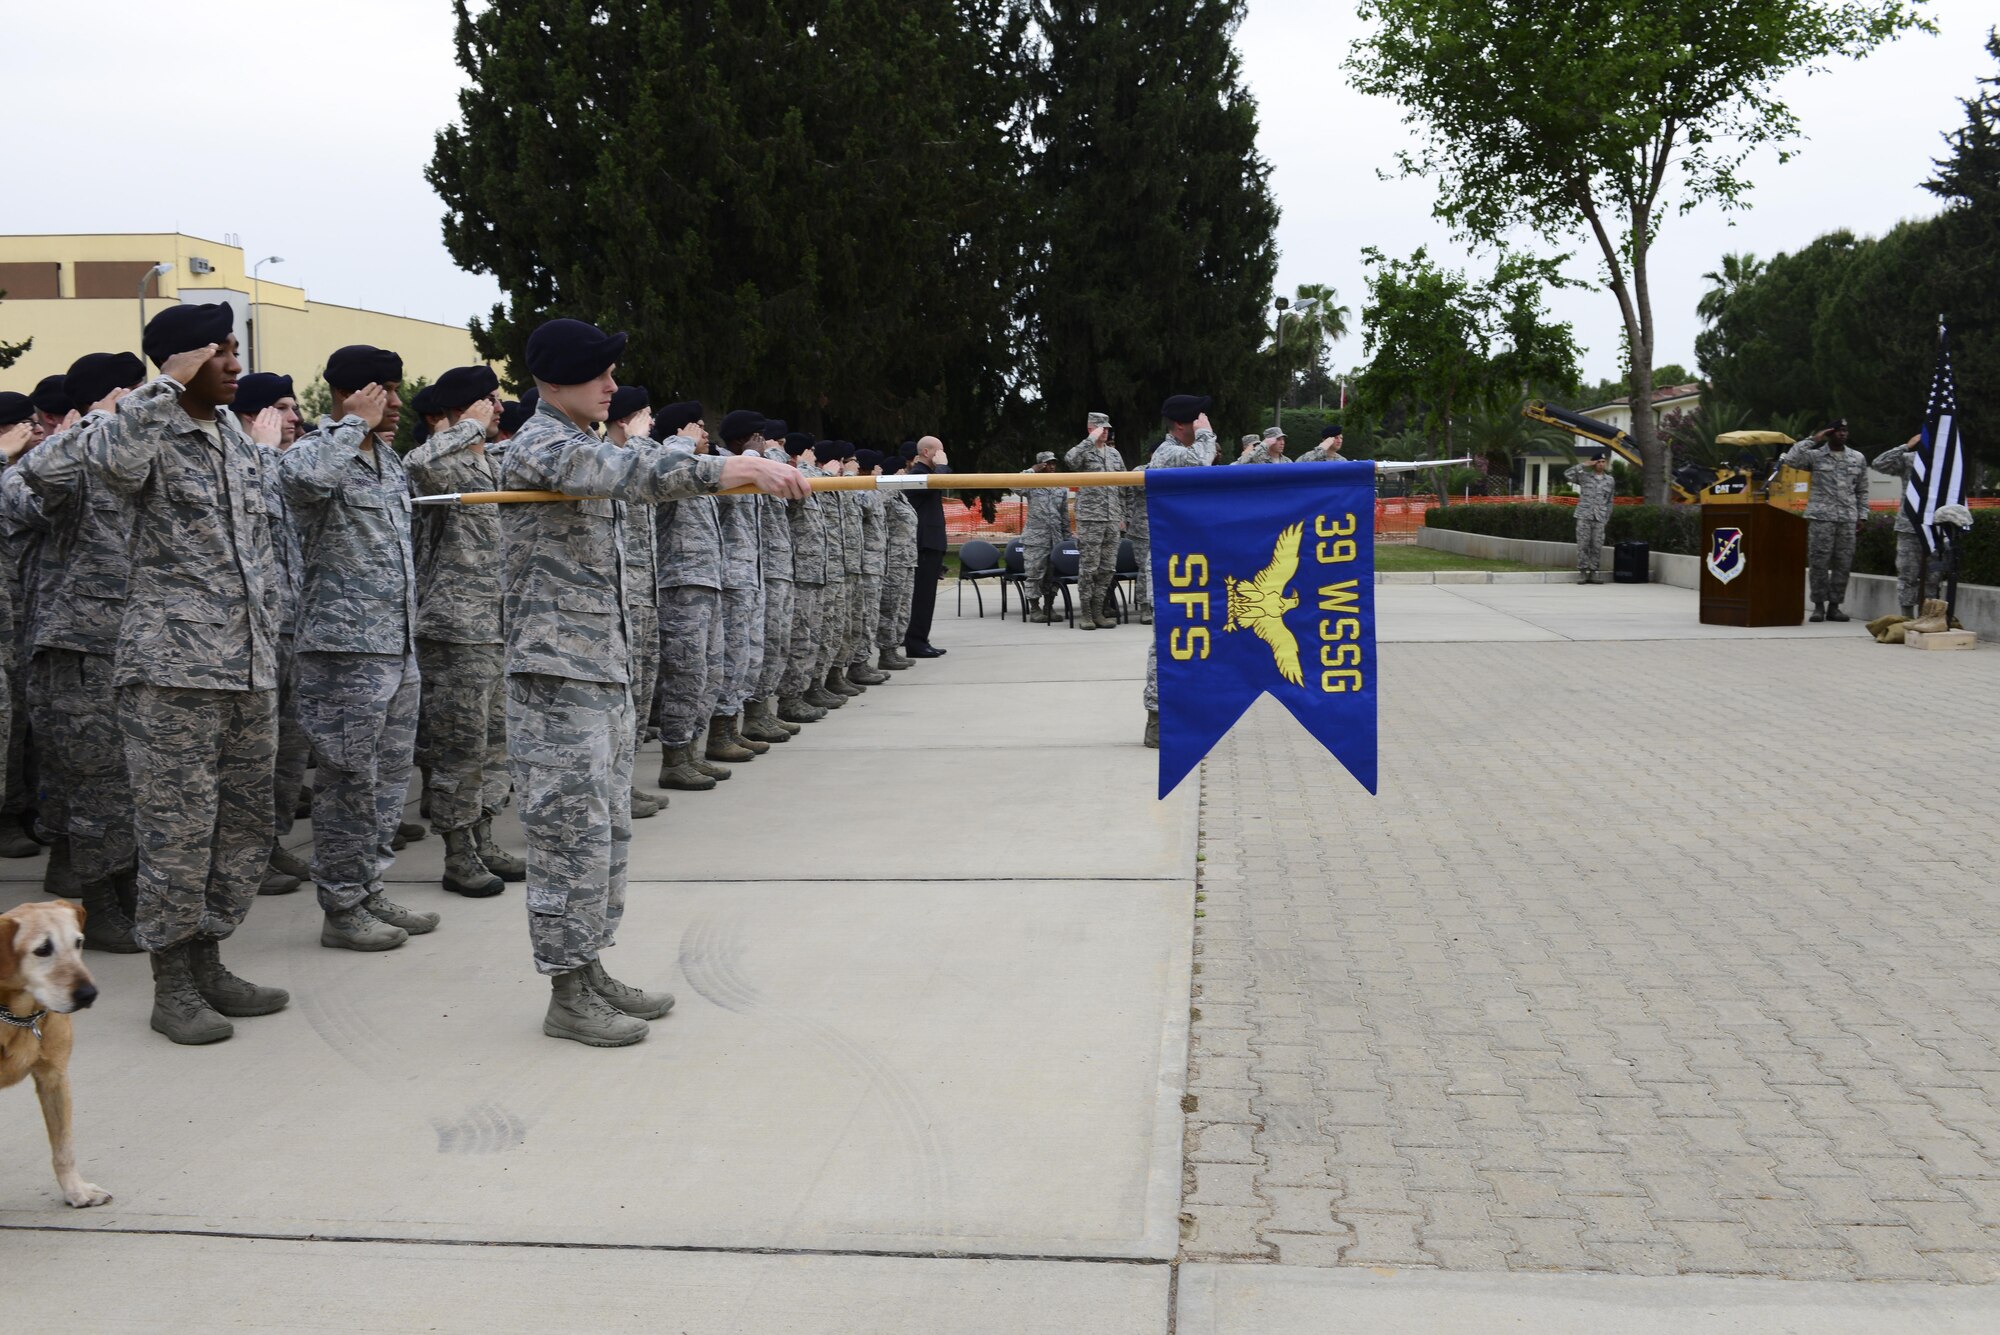 Members of the 39th Security Forces Squadron and their counterparts render a salute during a National Police Week retreat ceremony May 15, 2016, at Incirlik Air Base, Turkey. The ceremony allowed time for those in attendance to honor fallen law enforcement officers. (U.S. Air Force photo by Staff Sgt. Caleb Pierce/Released)